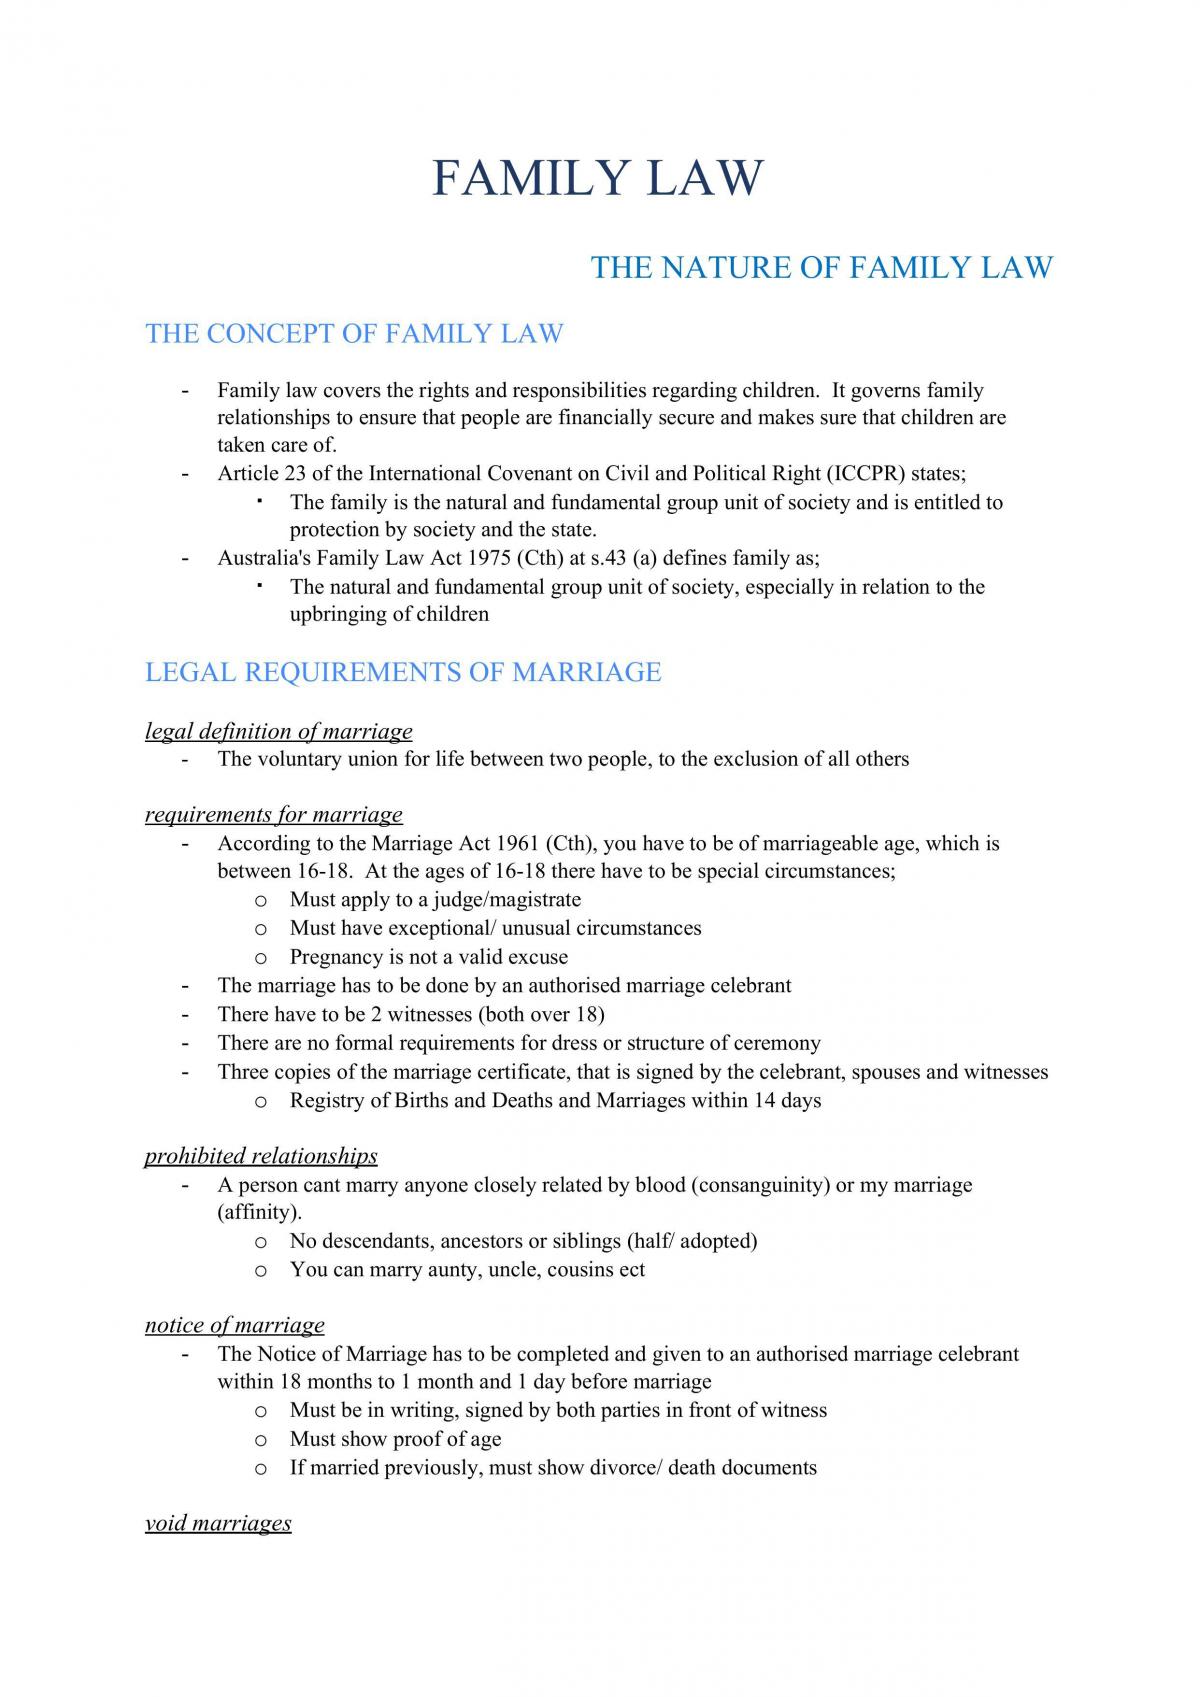 dissertation in family law